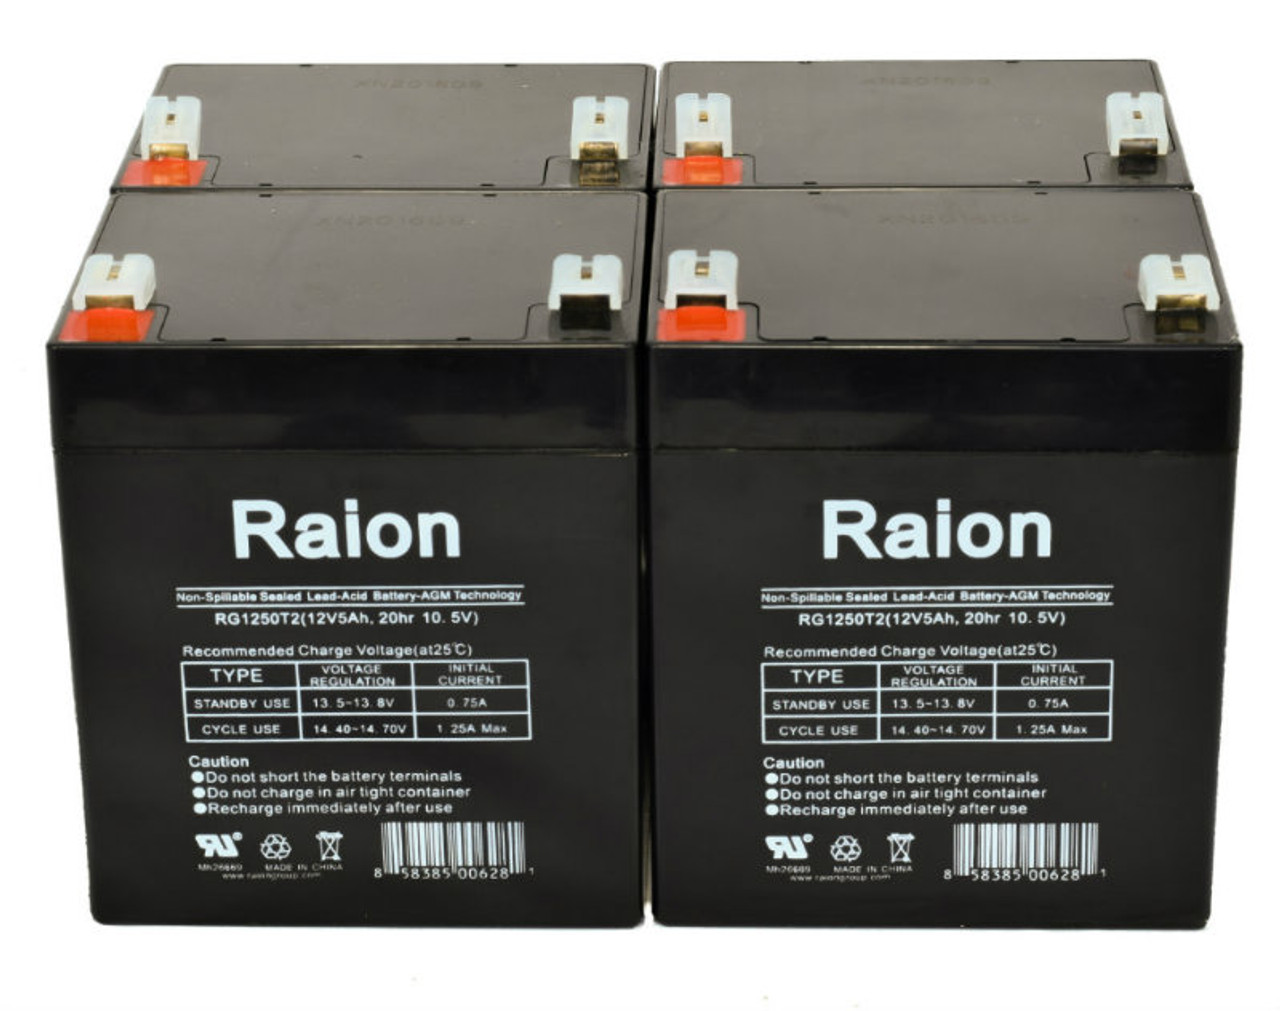 Raion Power 12V 5Ah RG1250T2 Replacement Lead Acid Battery for Narada 6-FM-4 - 4 Pack